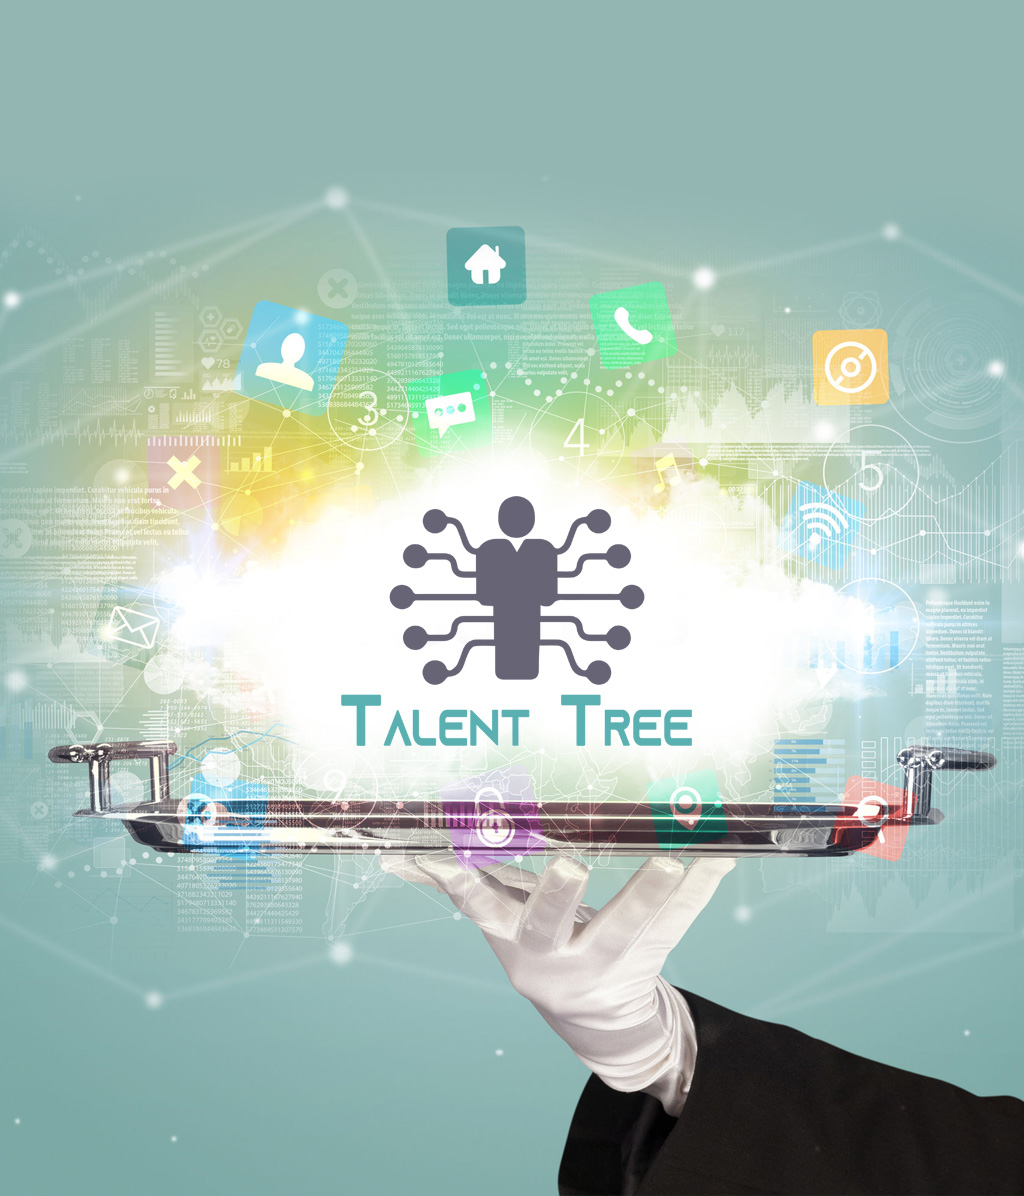 About Talent Tree